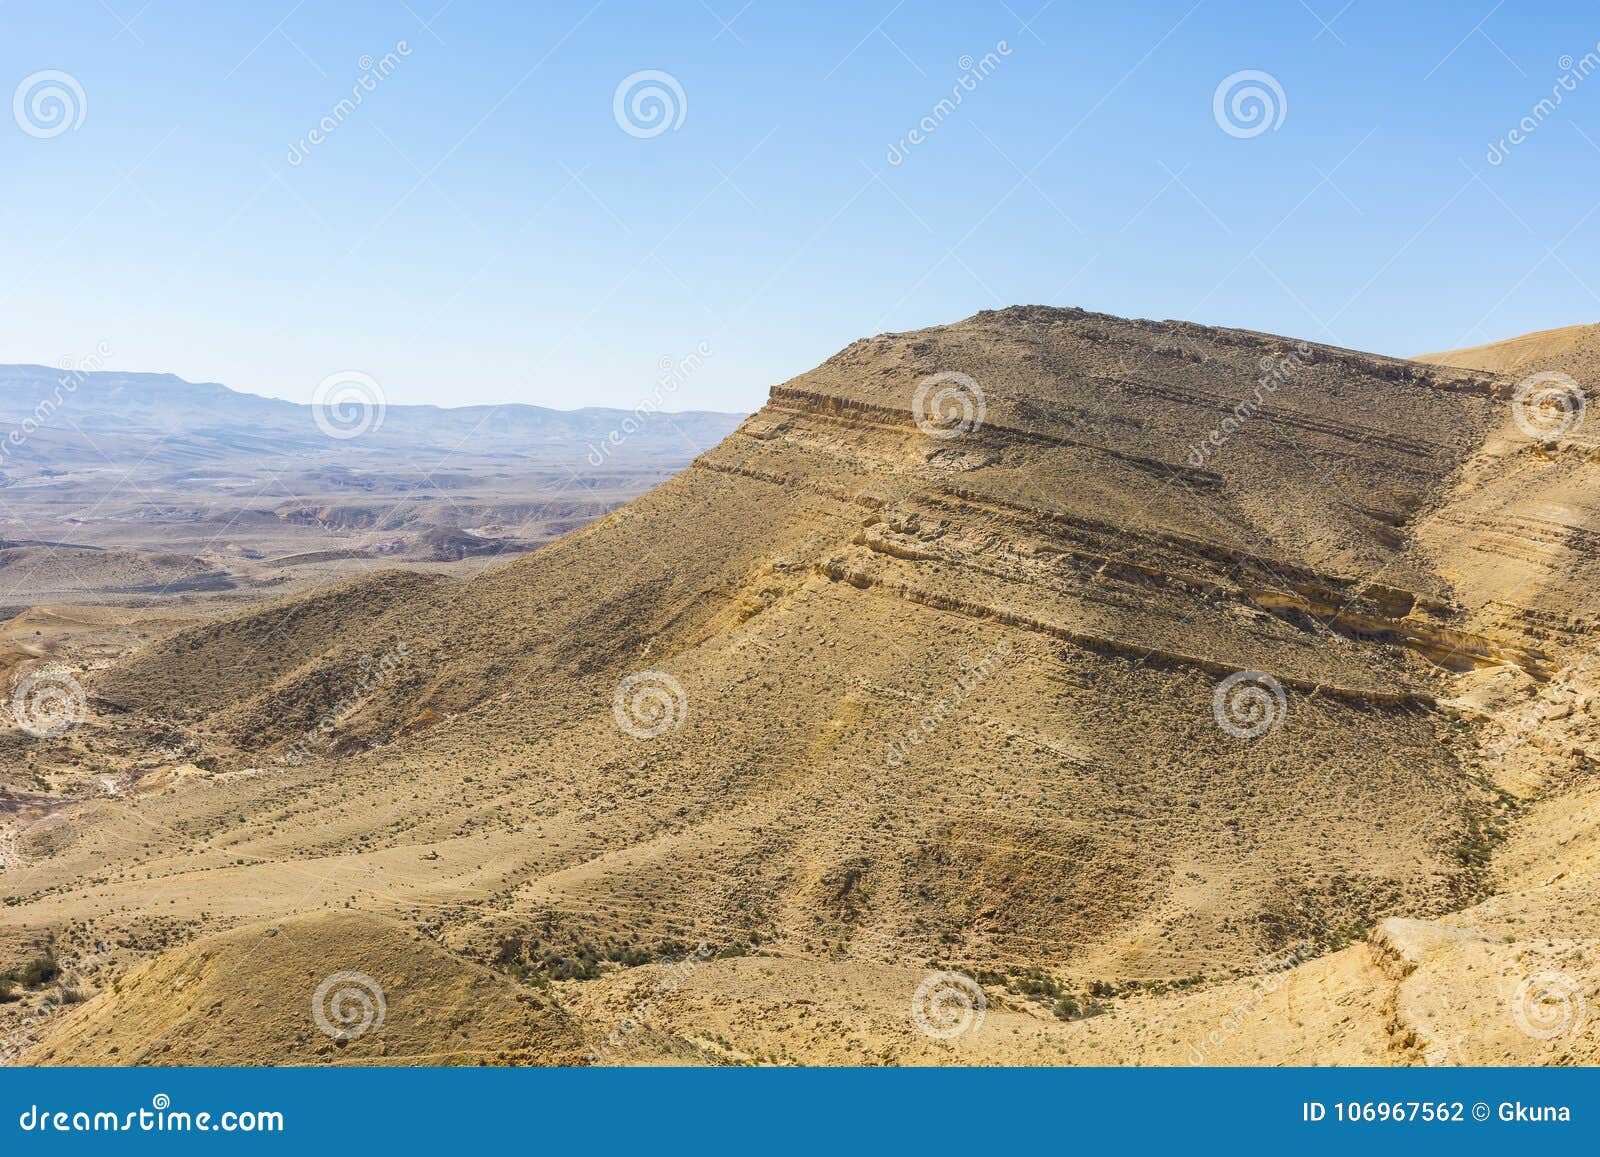 Wadis and Craters of Israel Desert. Stock Photo - Image of danger